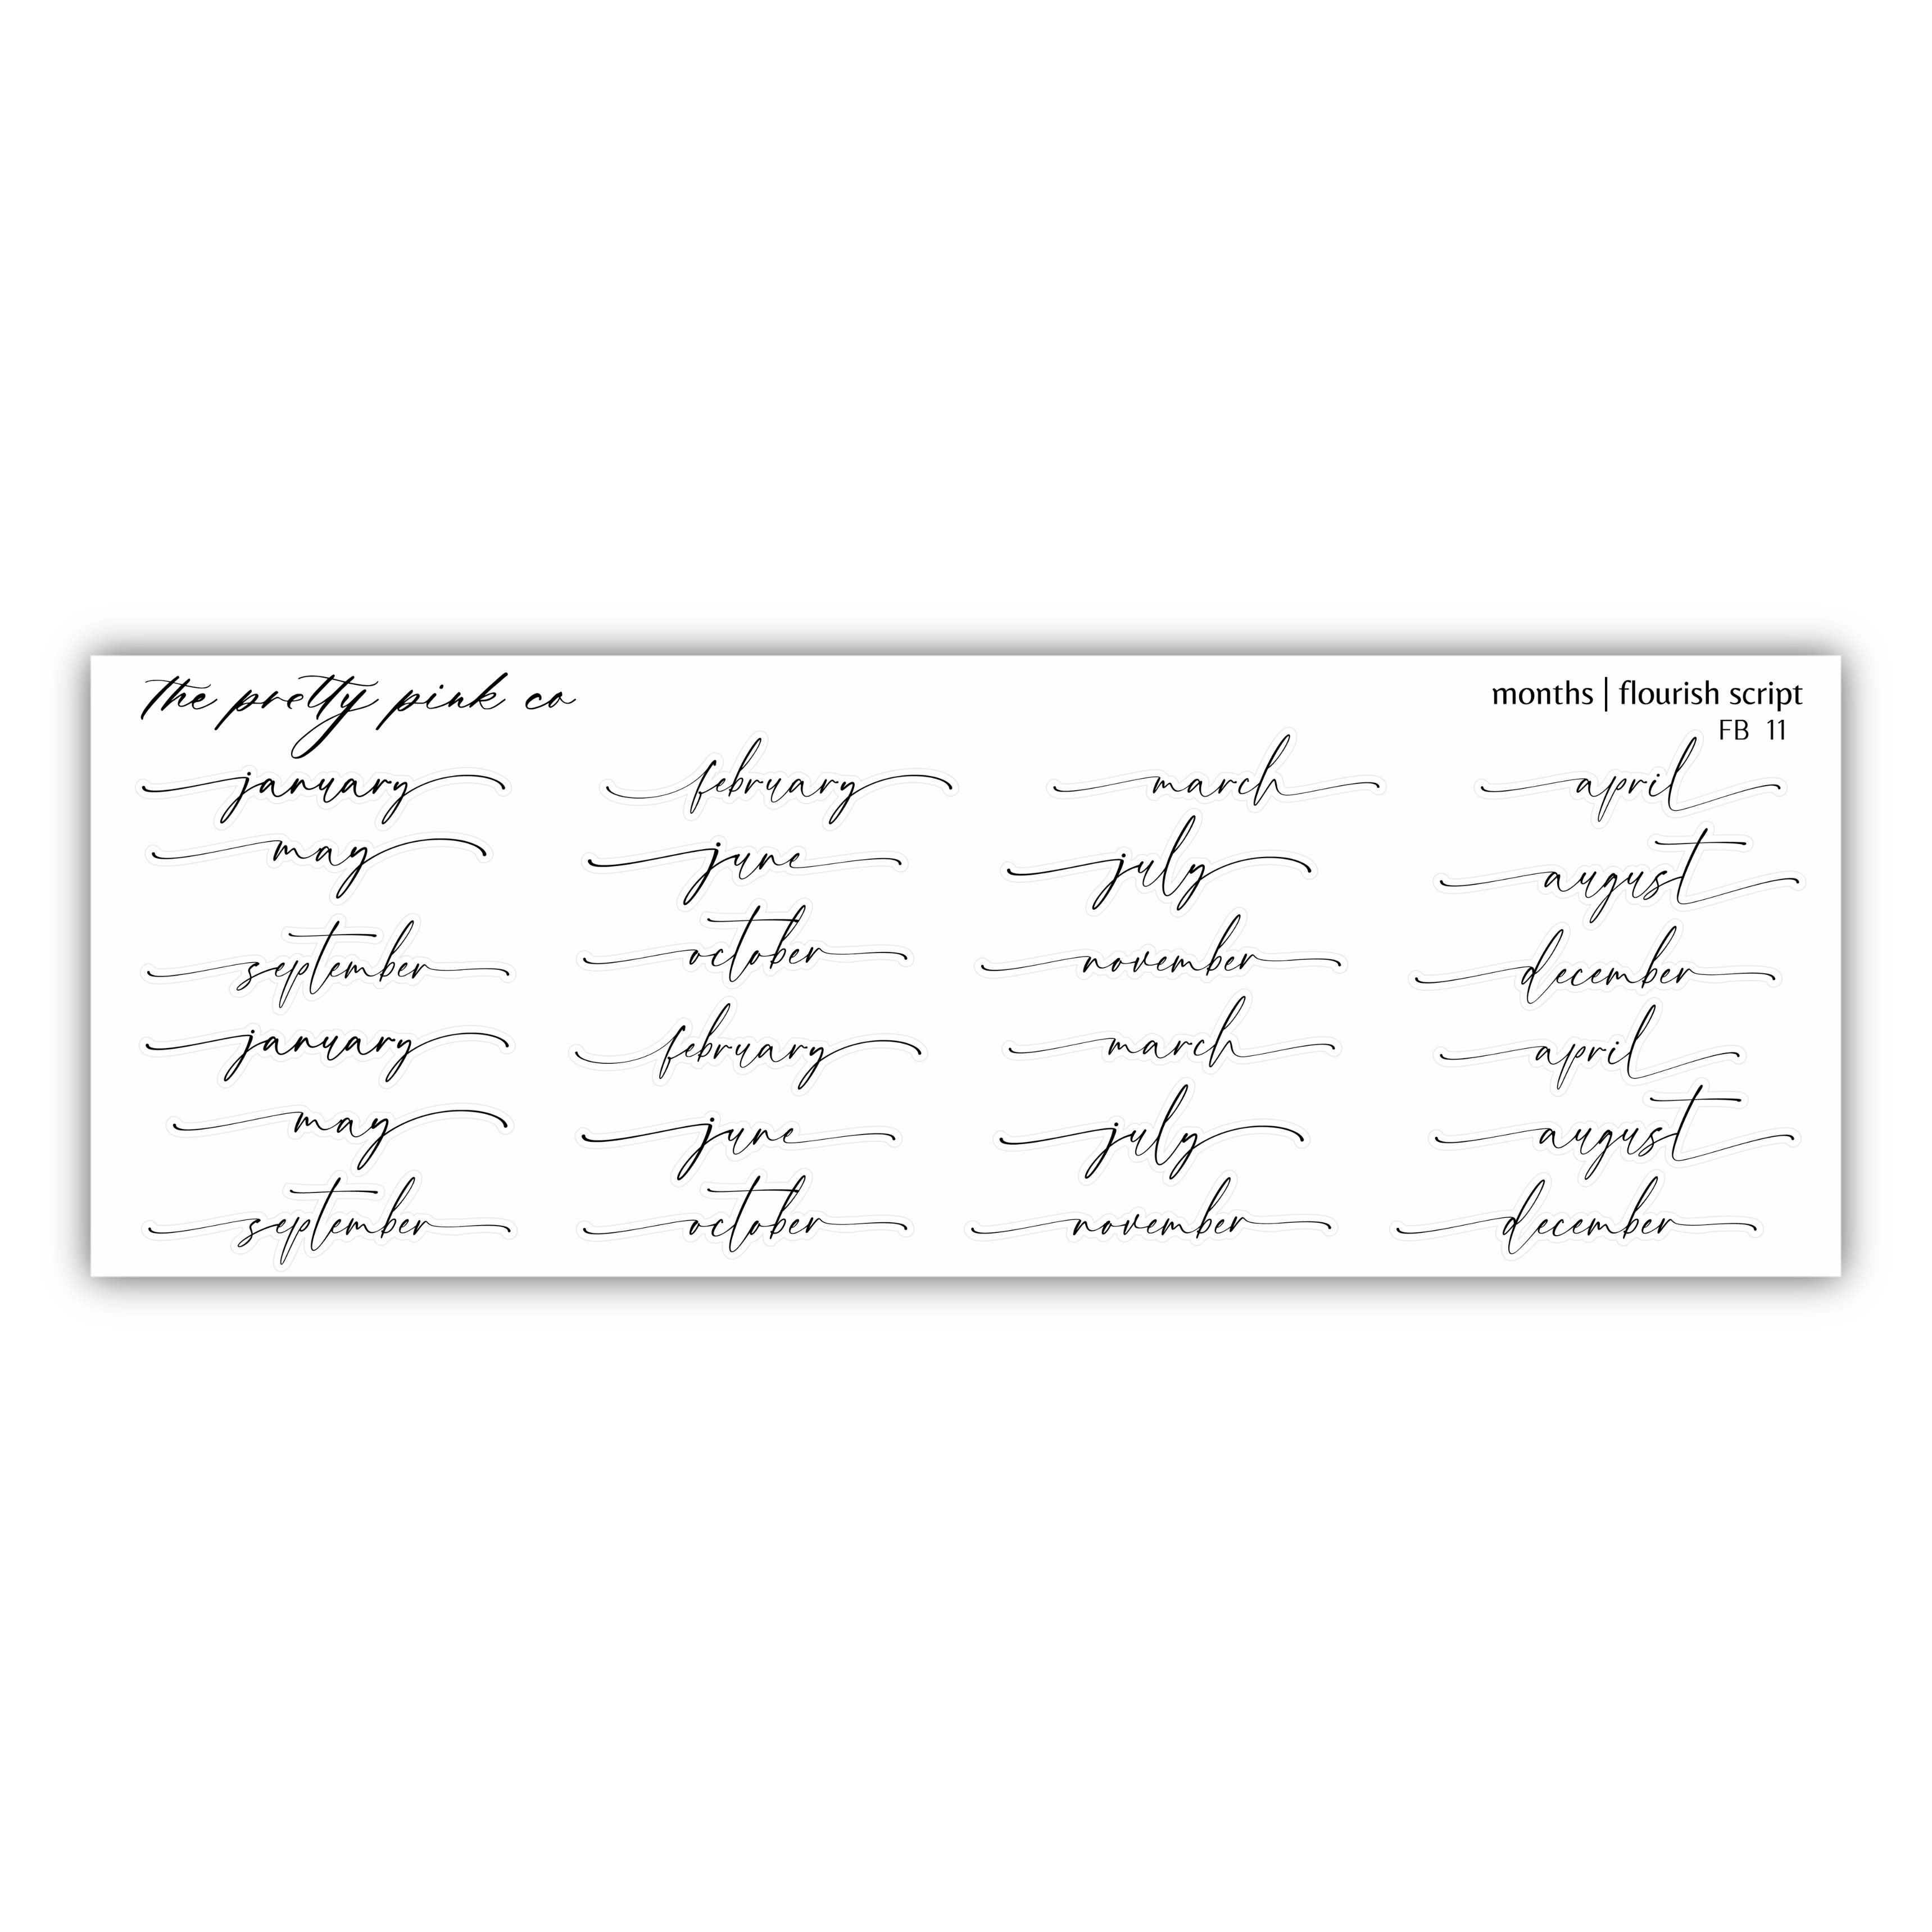 a sheet of paper with writing on it